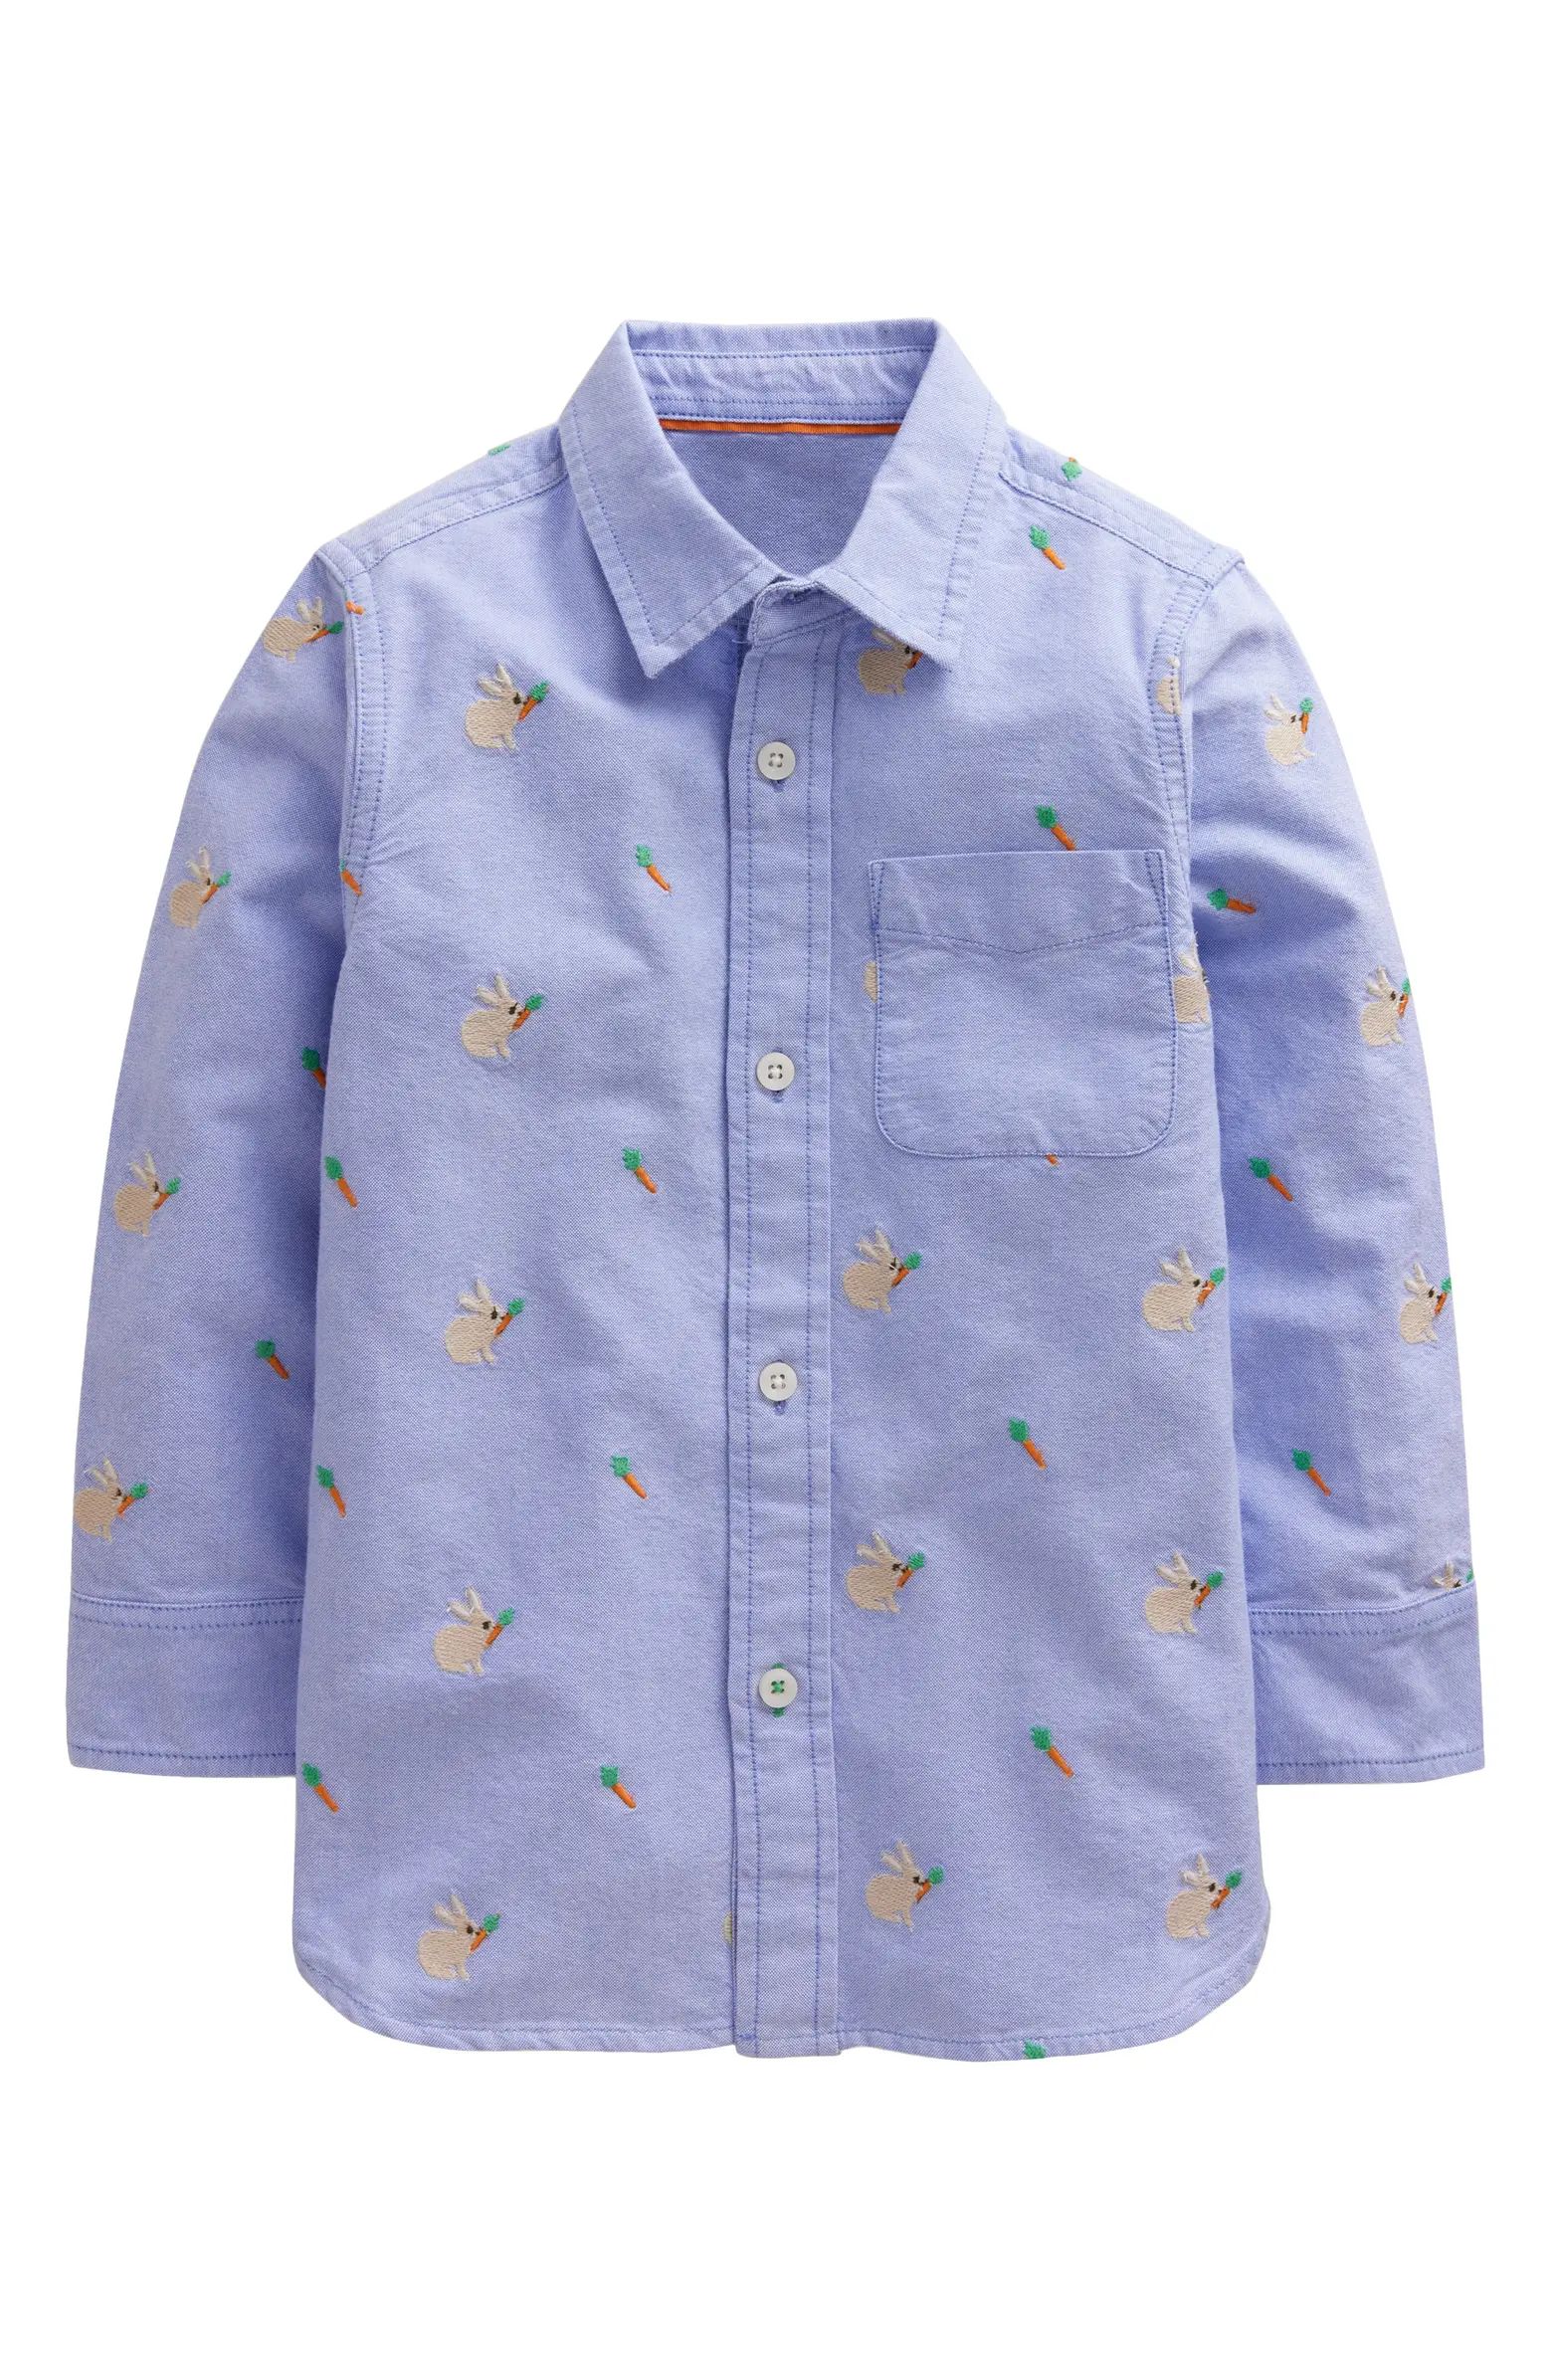 Kids' Embroidered Cotton Oxford Button-Up Shirt | Nordstrom